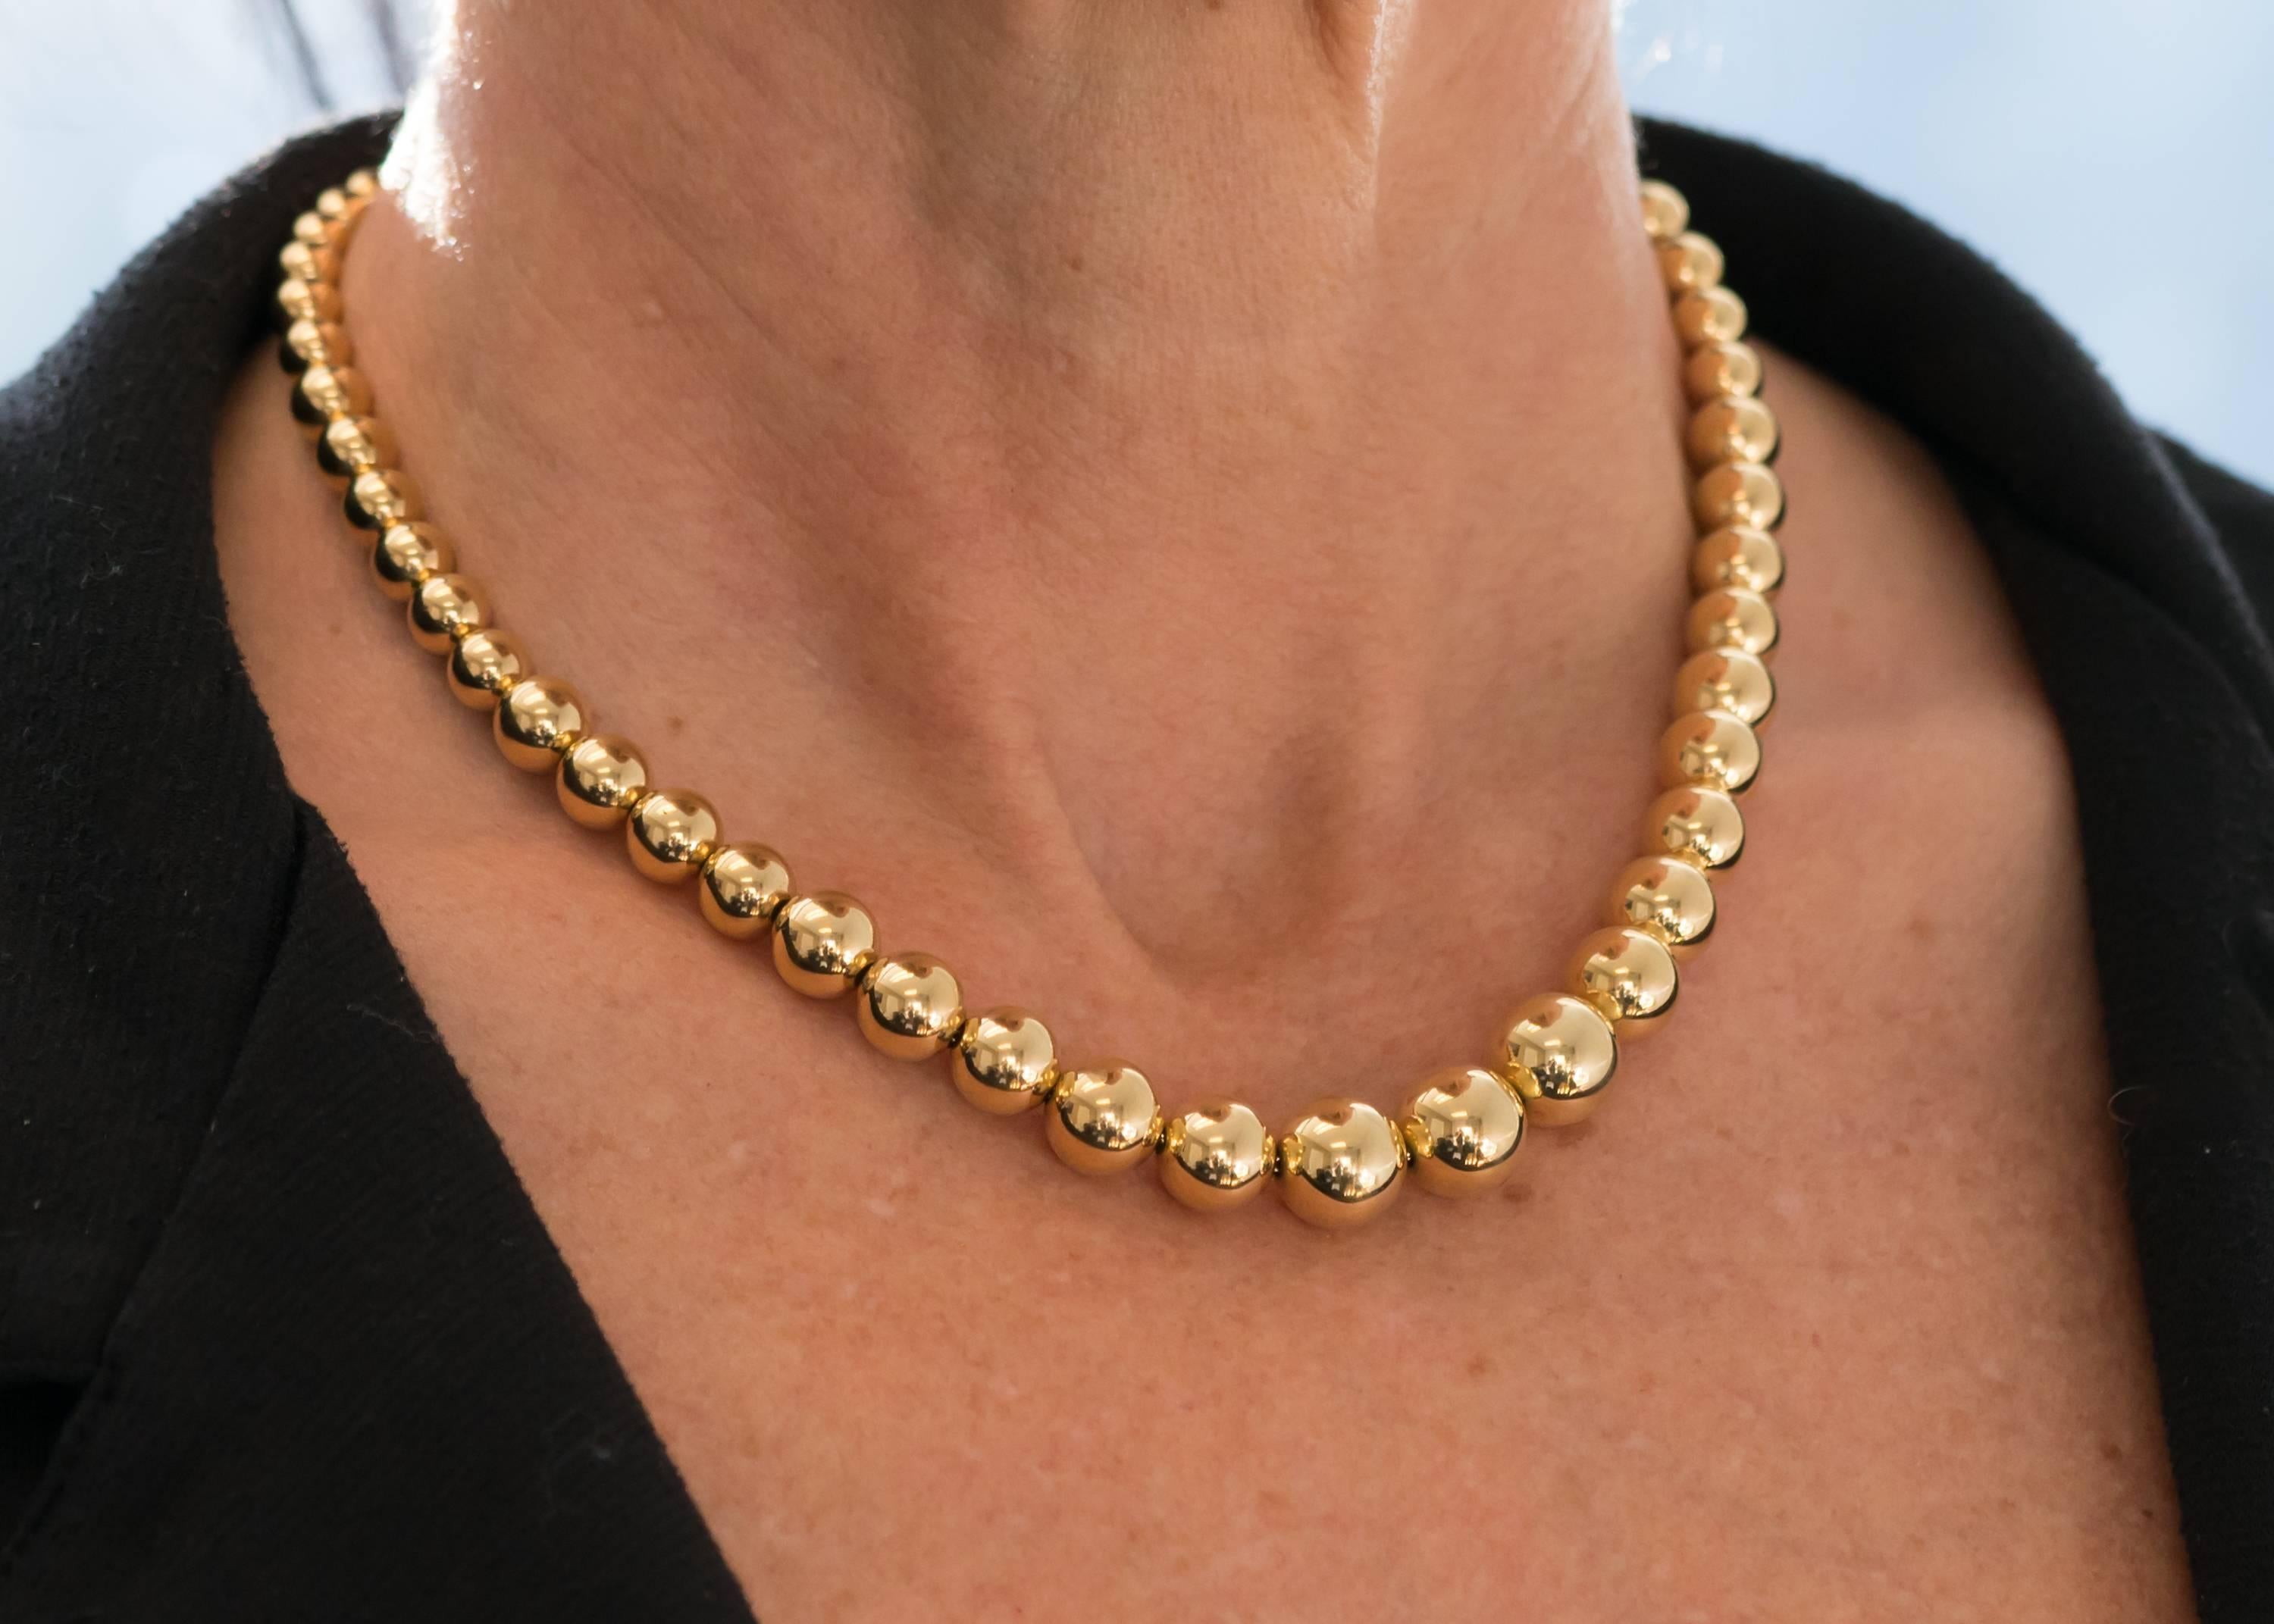 1960s Tiffany and Co 18K Yellow Gold Bead Necklace. Features 18K Gold, individually strung, highly polished beads on an 18K Gold rope twist Chain. The beads graduate in diameter from 6.1 millimeters in the back to 11 millimeters at the front center.